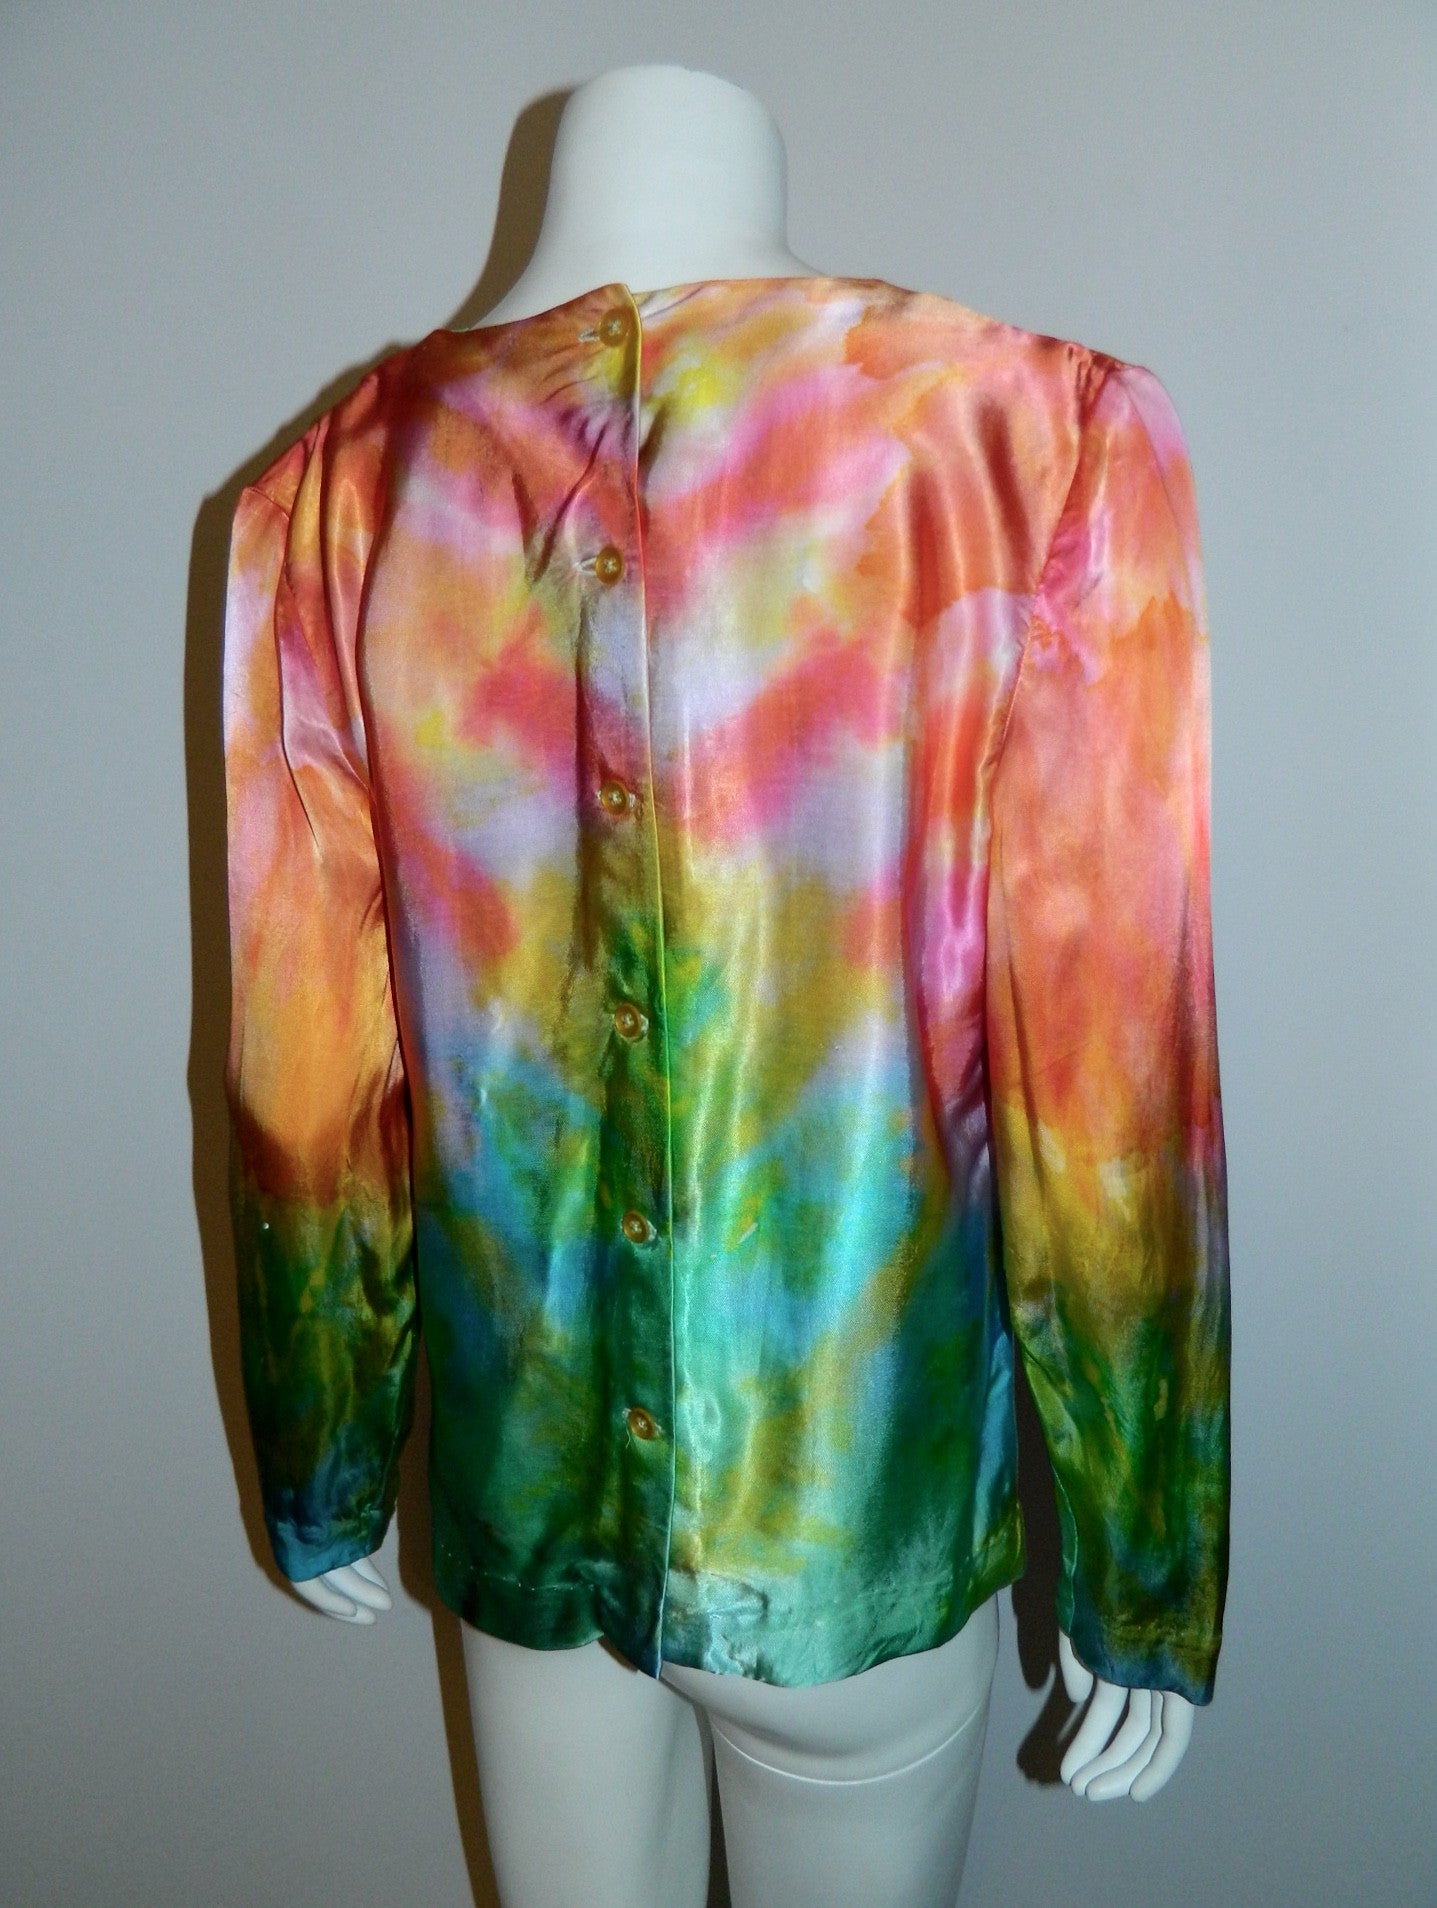 vintage 1970s satin rainbow blouse / hand dyed rayon / button back OOAK